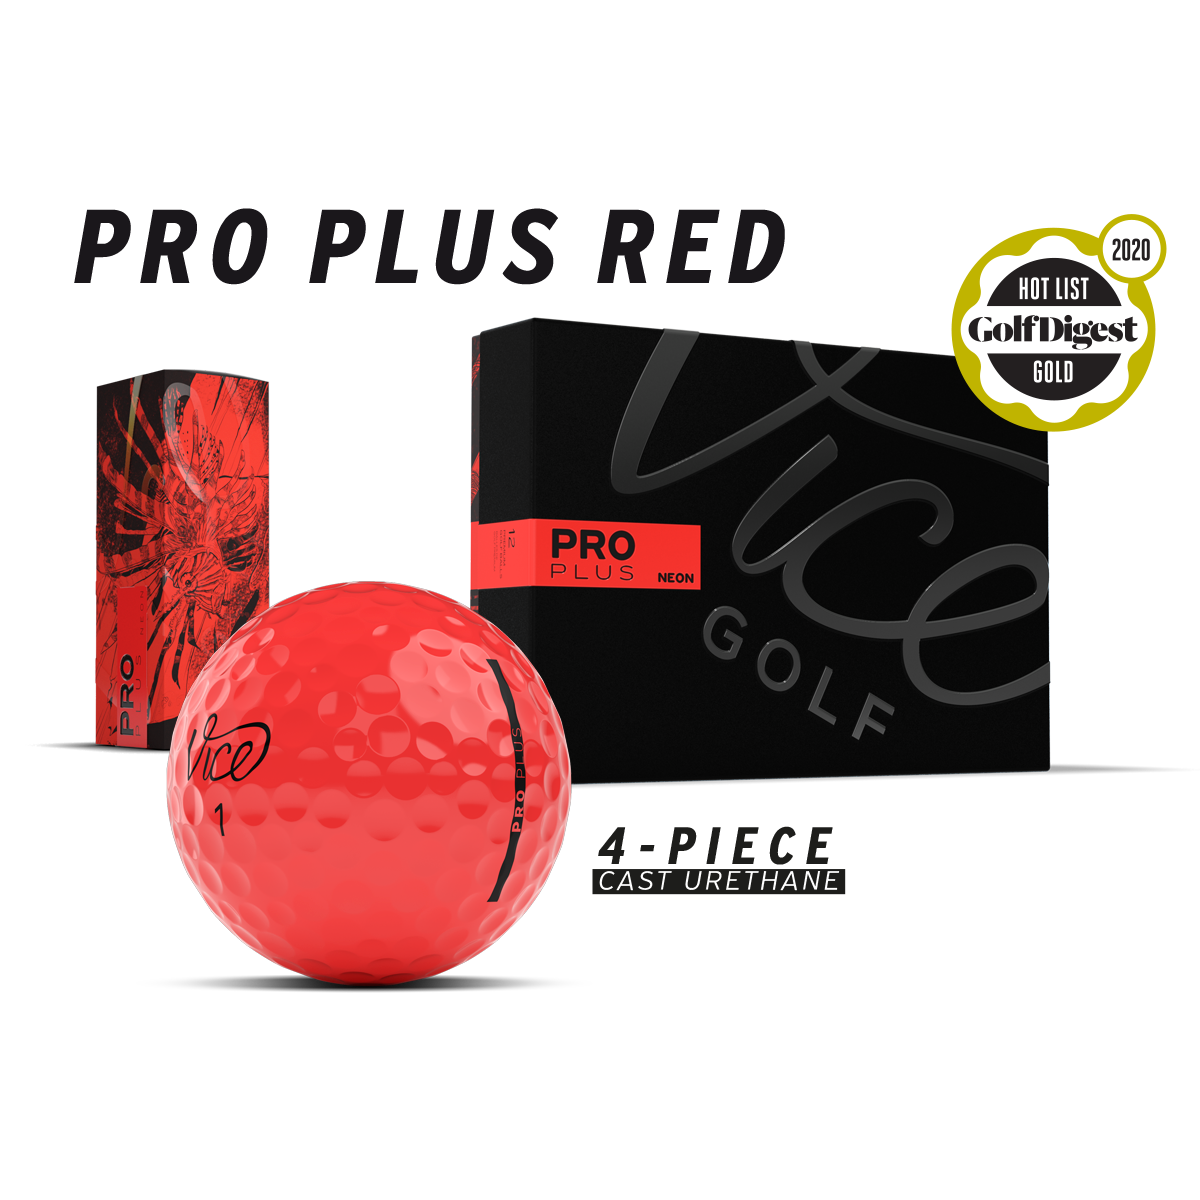 Pro Plus Red package